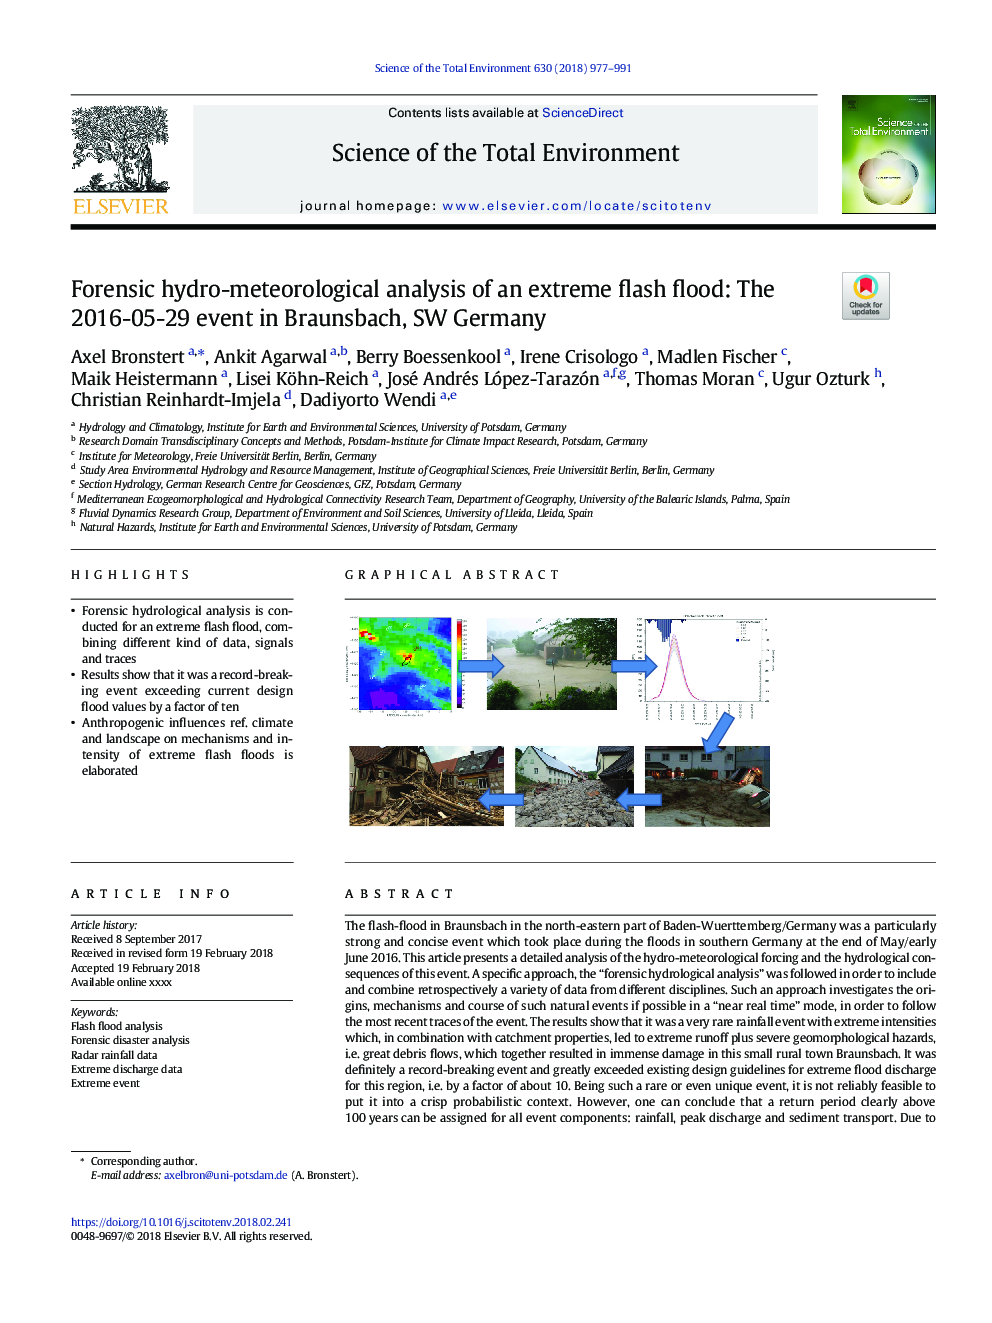 Forensic hydro-meteorological analysis of an extreme flash flood: The 2016-05-29 event in Braunsbach, SW Germany